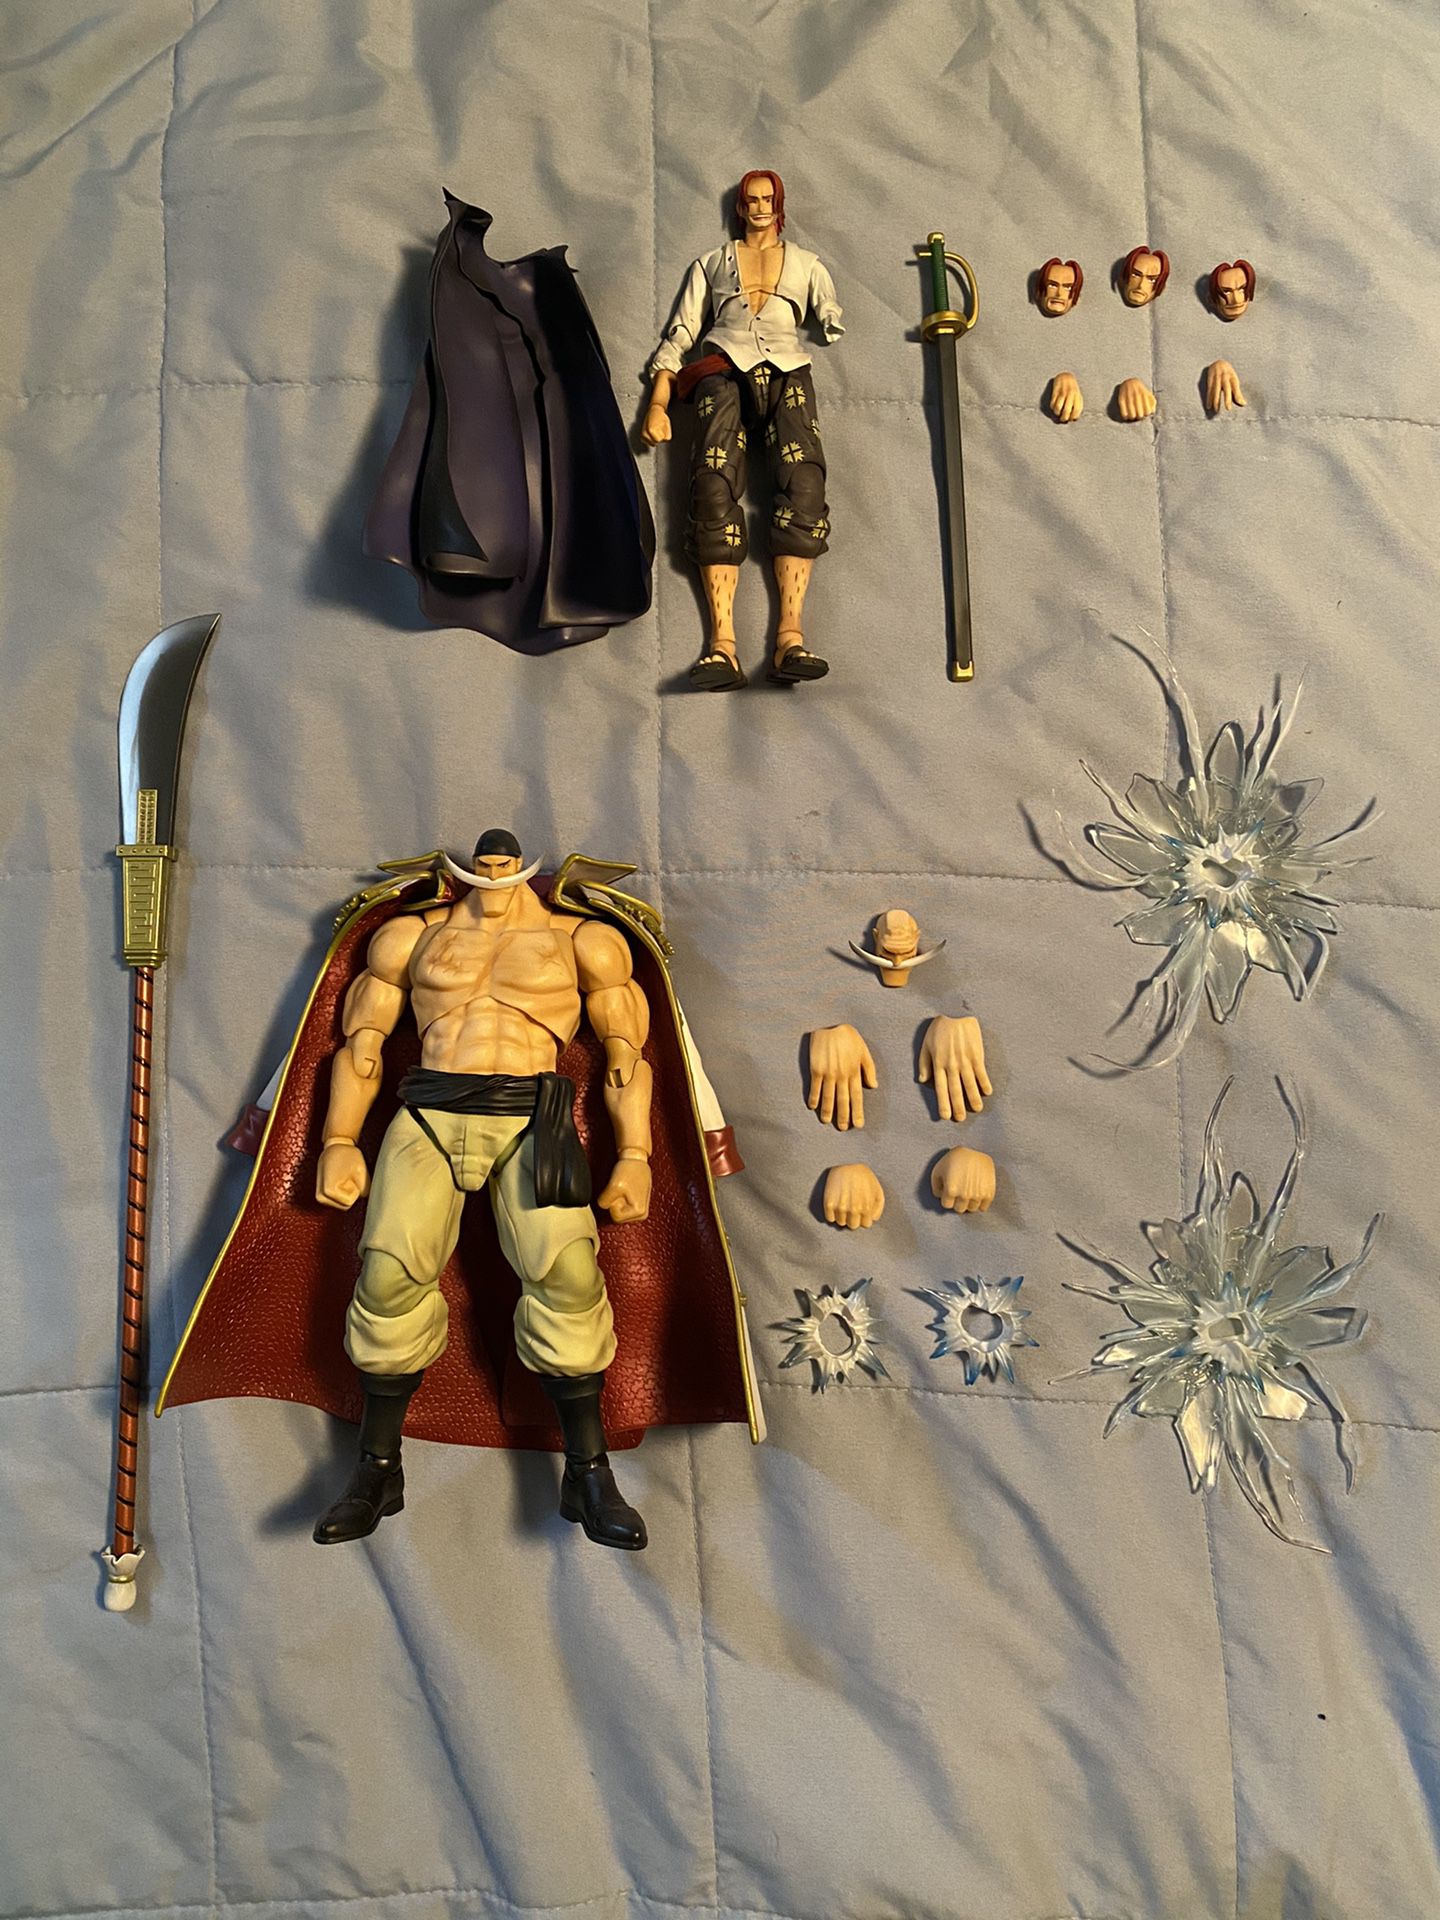 Variable Action Heroes One Piece White Beard Shanks Action Figure Lot Bandai Megahouse Figuarts Mafex Figma